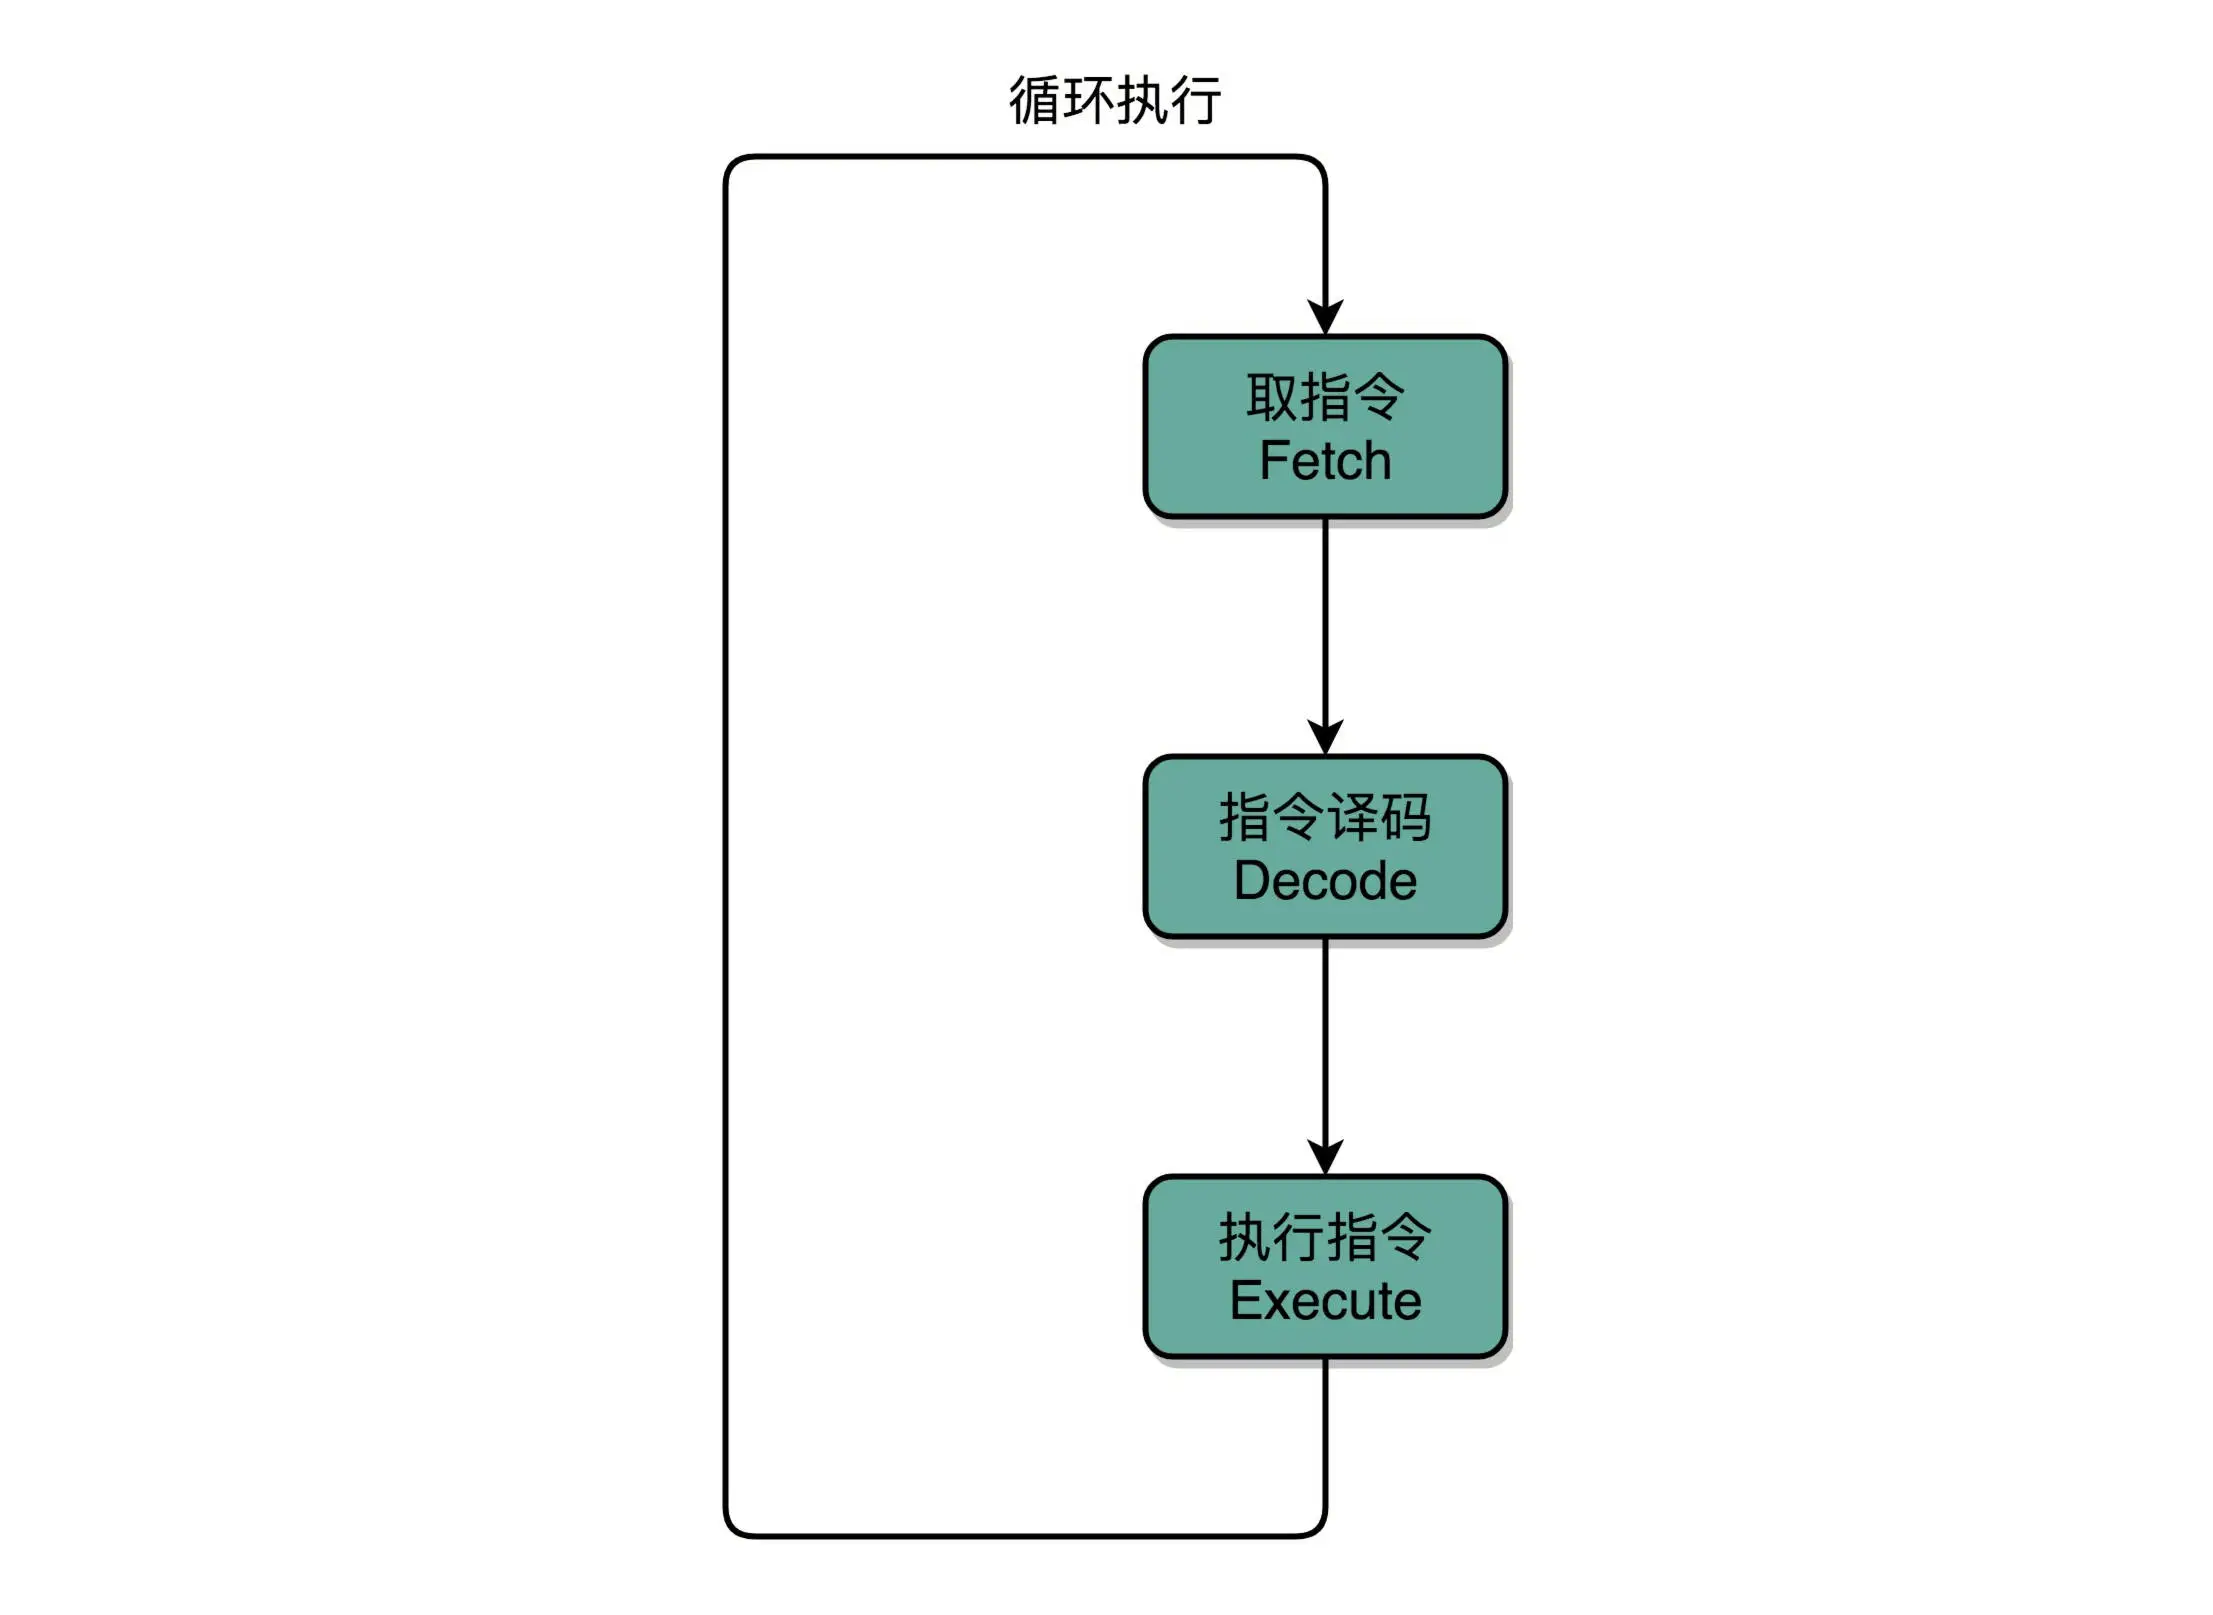 https://img.zhaoweiguo.com/knowledge/images/cores/composition-principles/data-path1.jpg